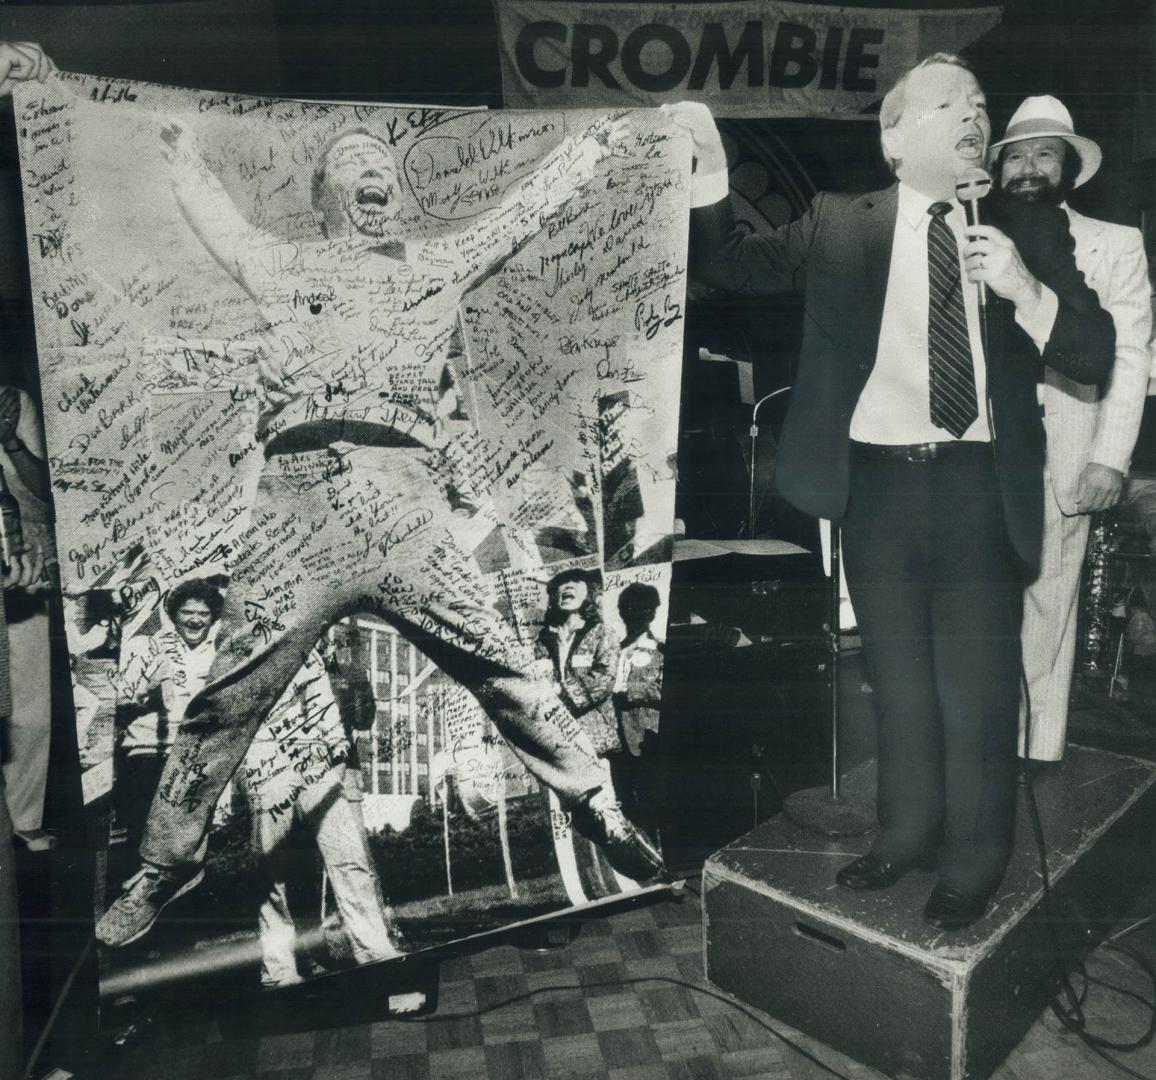 Now here's a good loser. David Crombie receives a giant photo of himself exercising during his unsuccessful campaign for the leadership of the Progres(...)